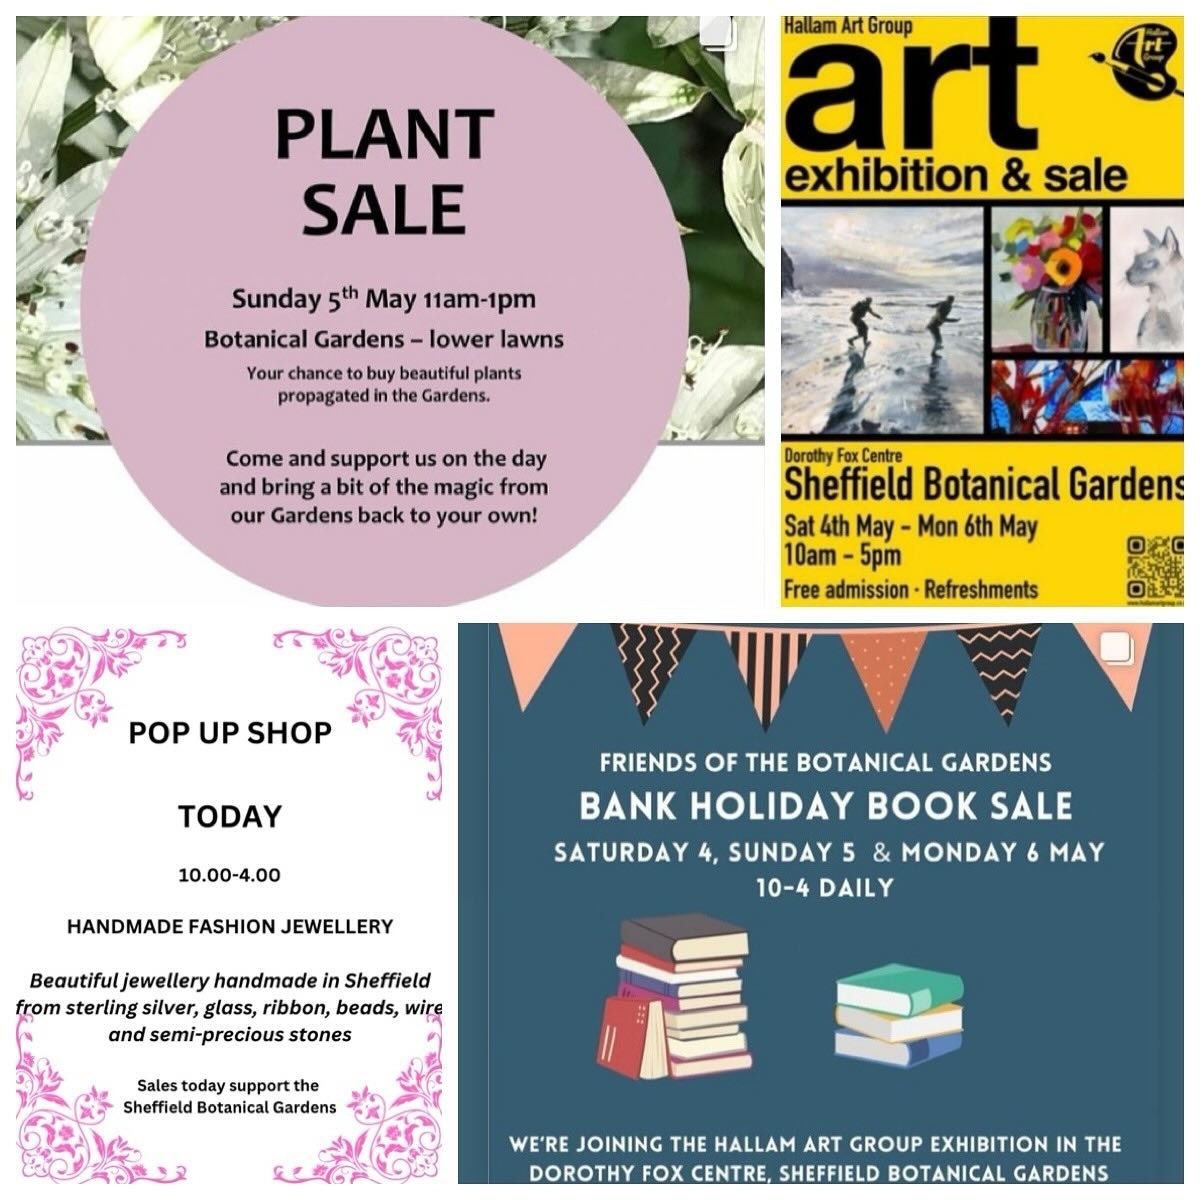 Just a reminder of what&rsquo;s on today (Sunday) at #sheffieldbotanicalgardens&hellip;&hellip;.

&bull; Plant sale 11-1
&bull; Books and lots of new botanical goods sale 10-4
&bull; Handmade fashion jewellery 10-4
&bull; Art exhibition and sale 10-5